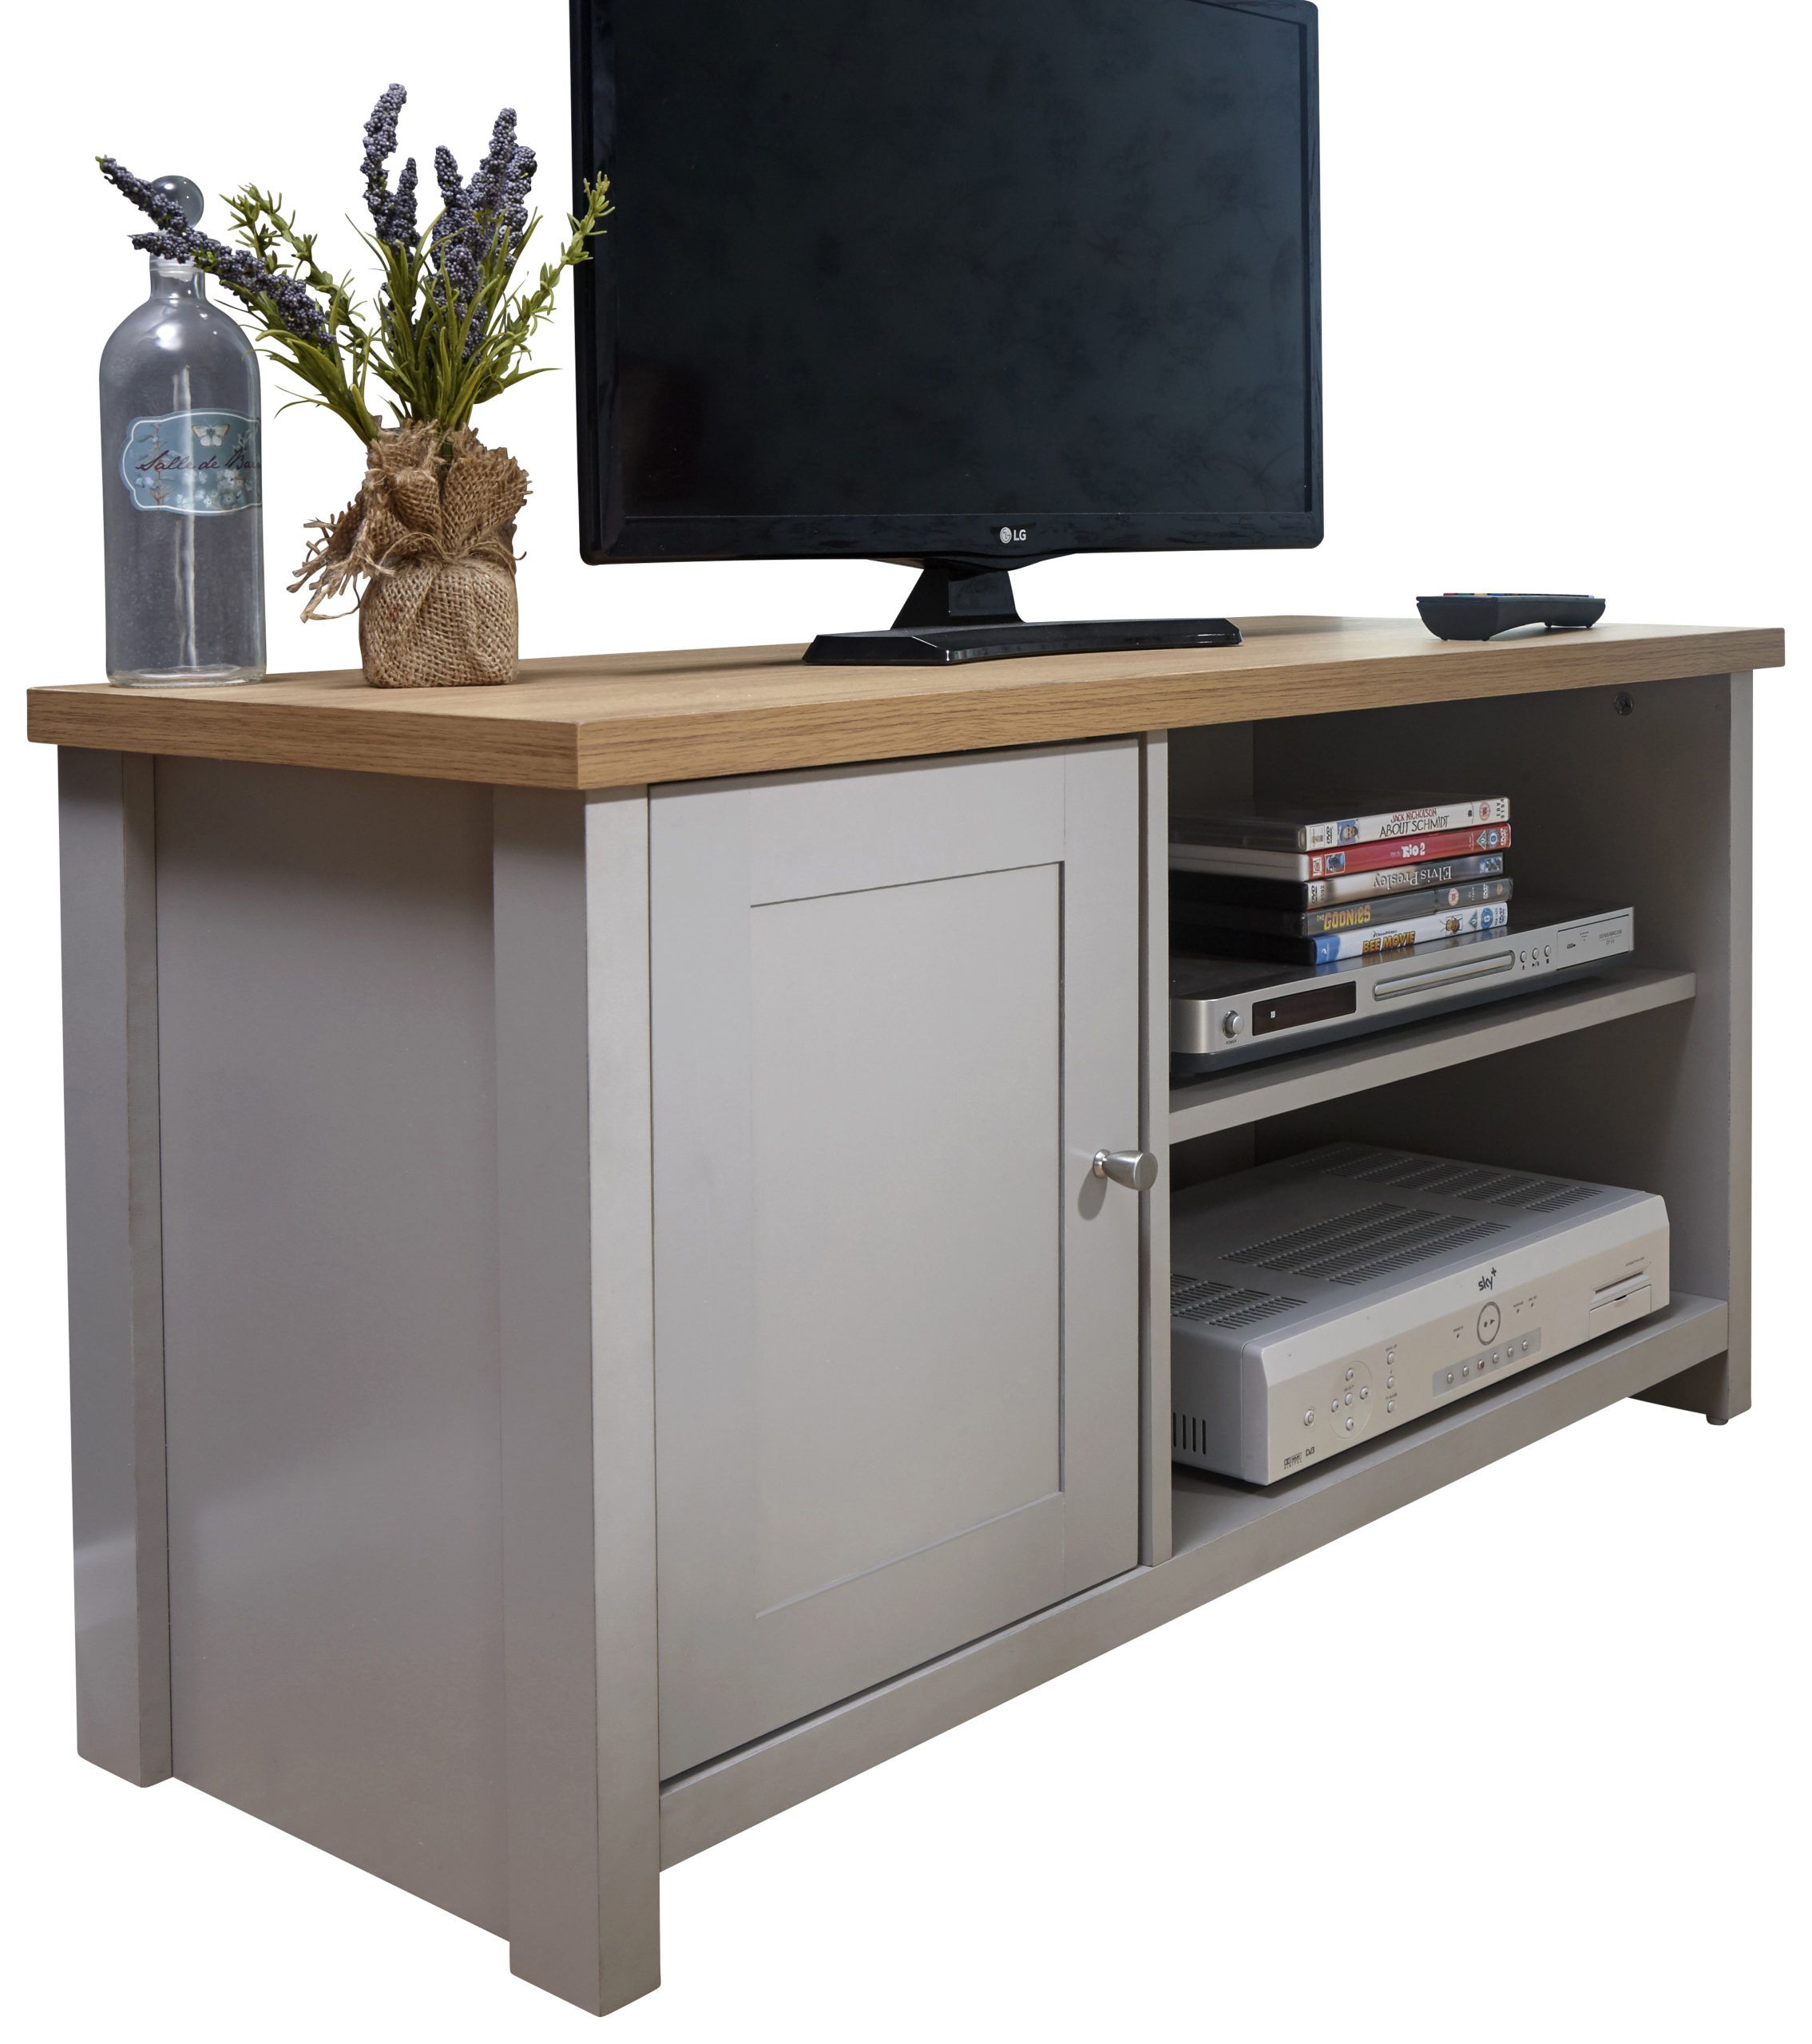 Fife Grey Small Tv Cabinet | Grey | Self Assembly | Oak World With Regard To Small Oak Tv Cabinets (View 4 of 15)